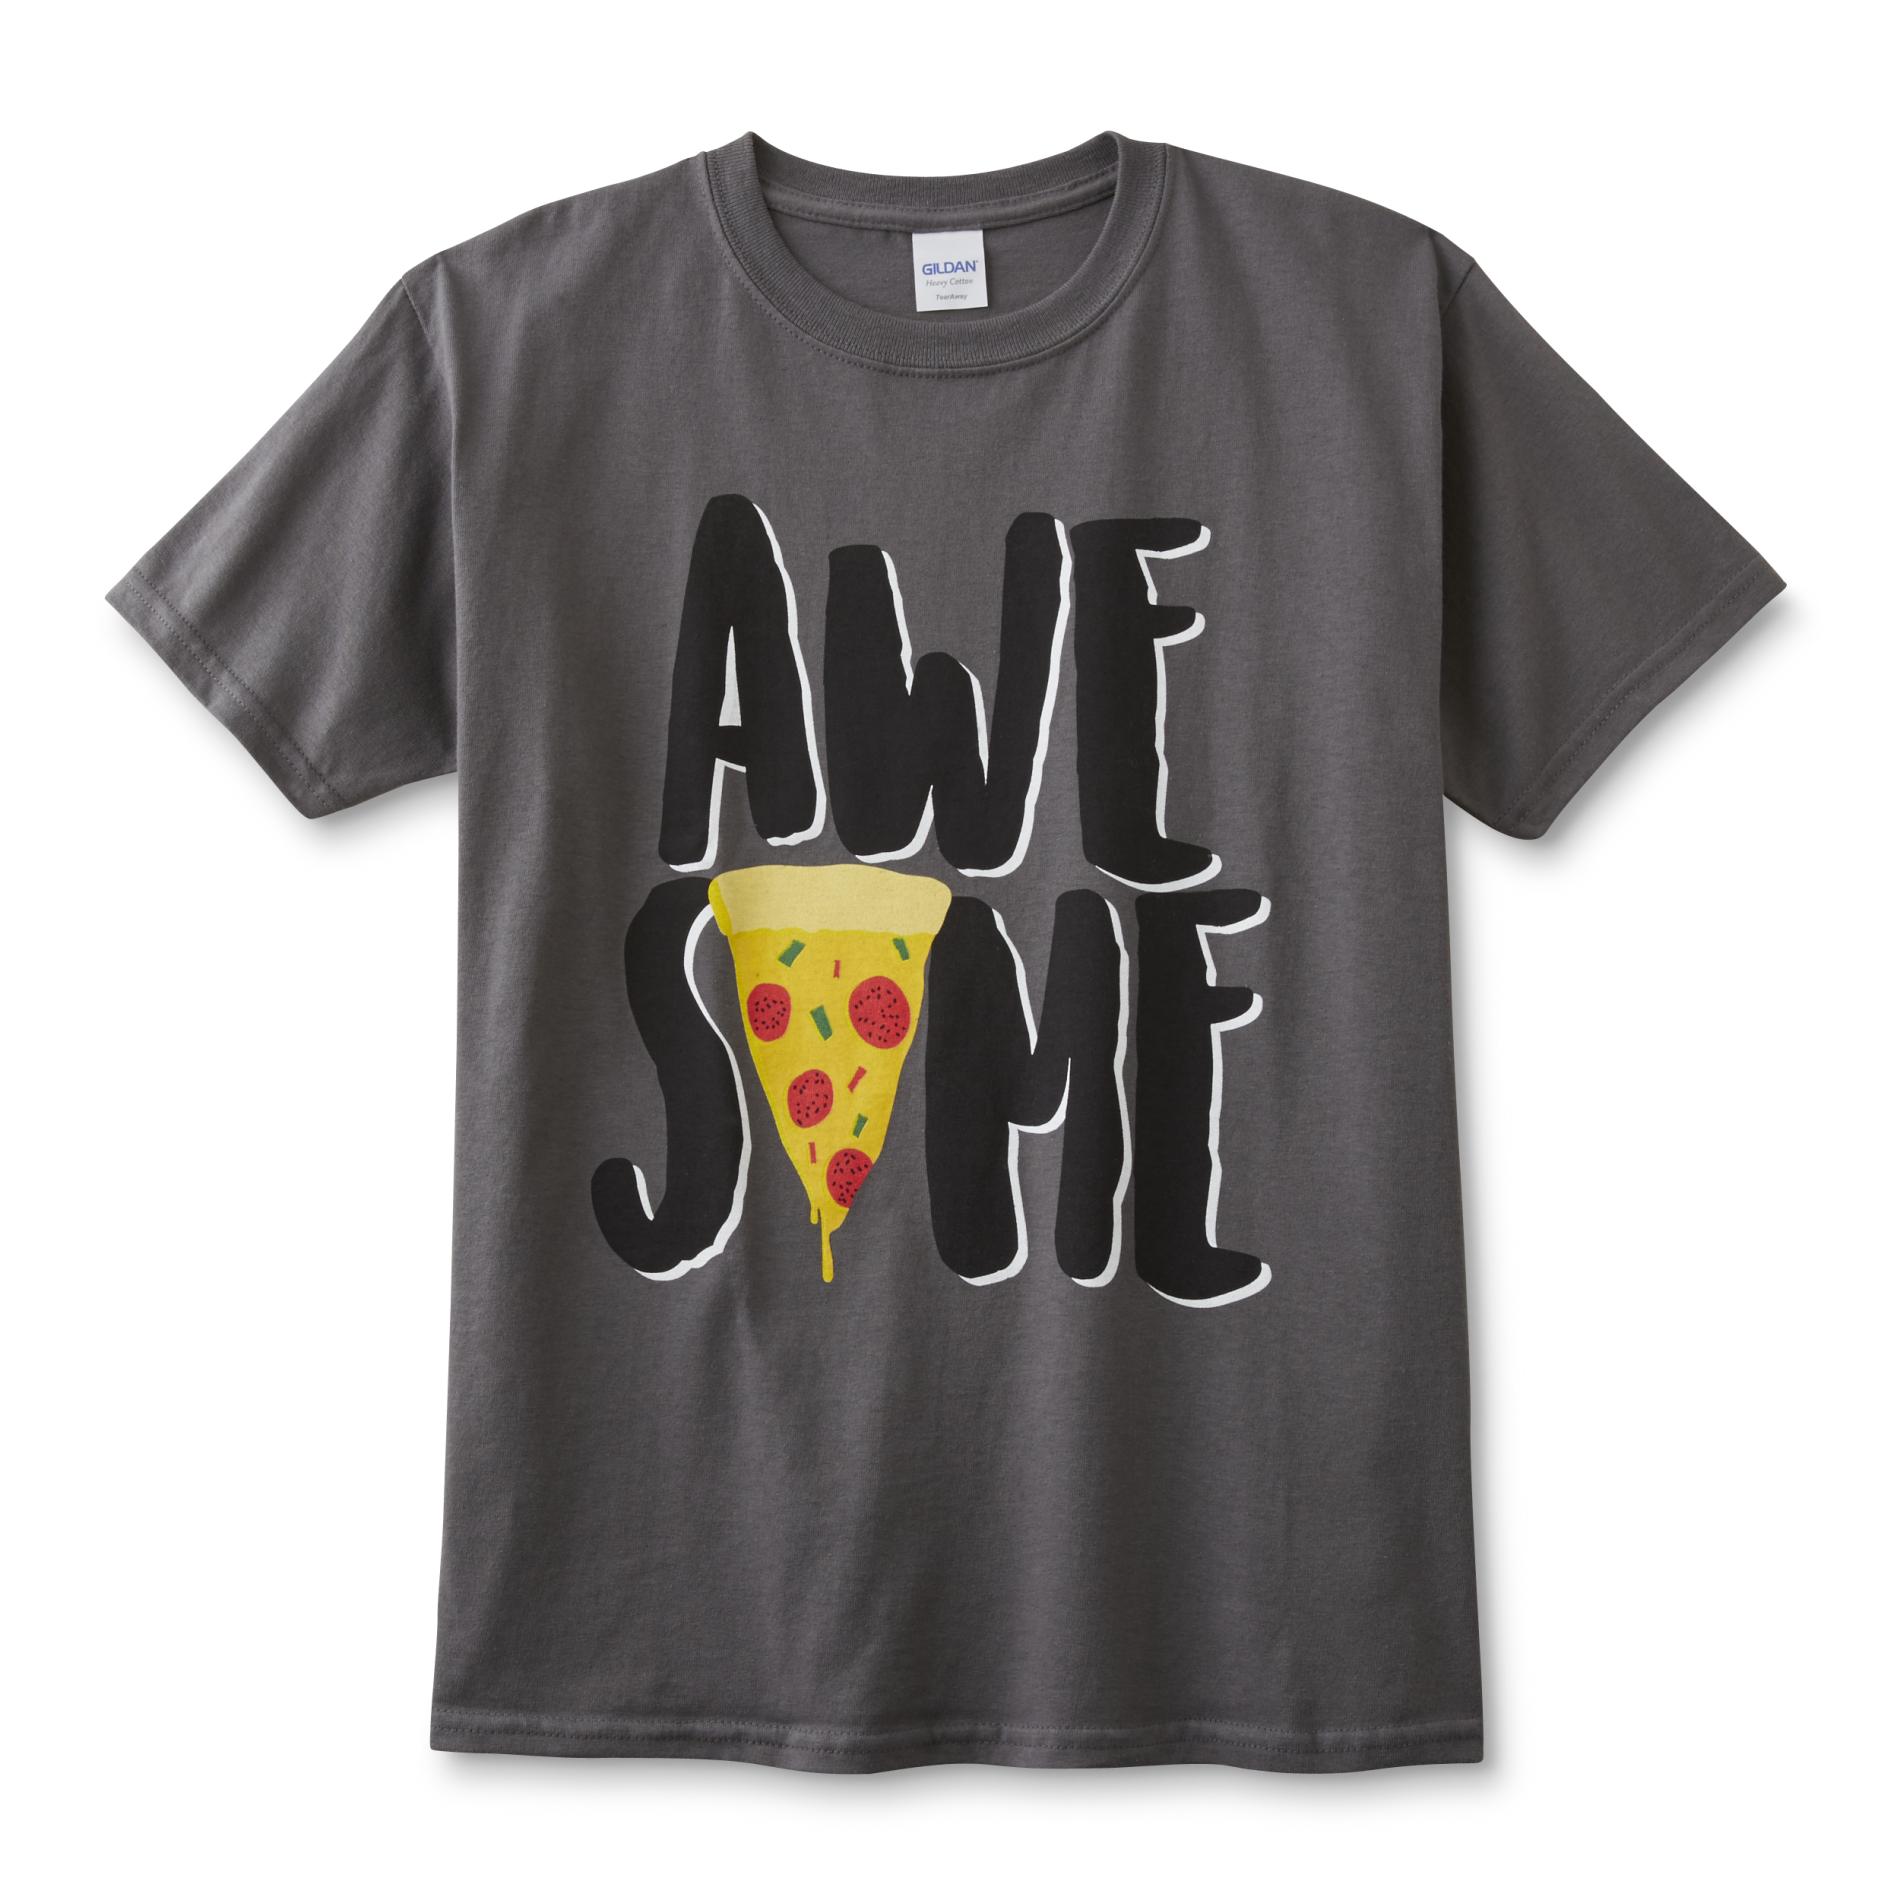 Screen Tee Market Brands Boys' Graphic T-Shirt - Awesome Pizza